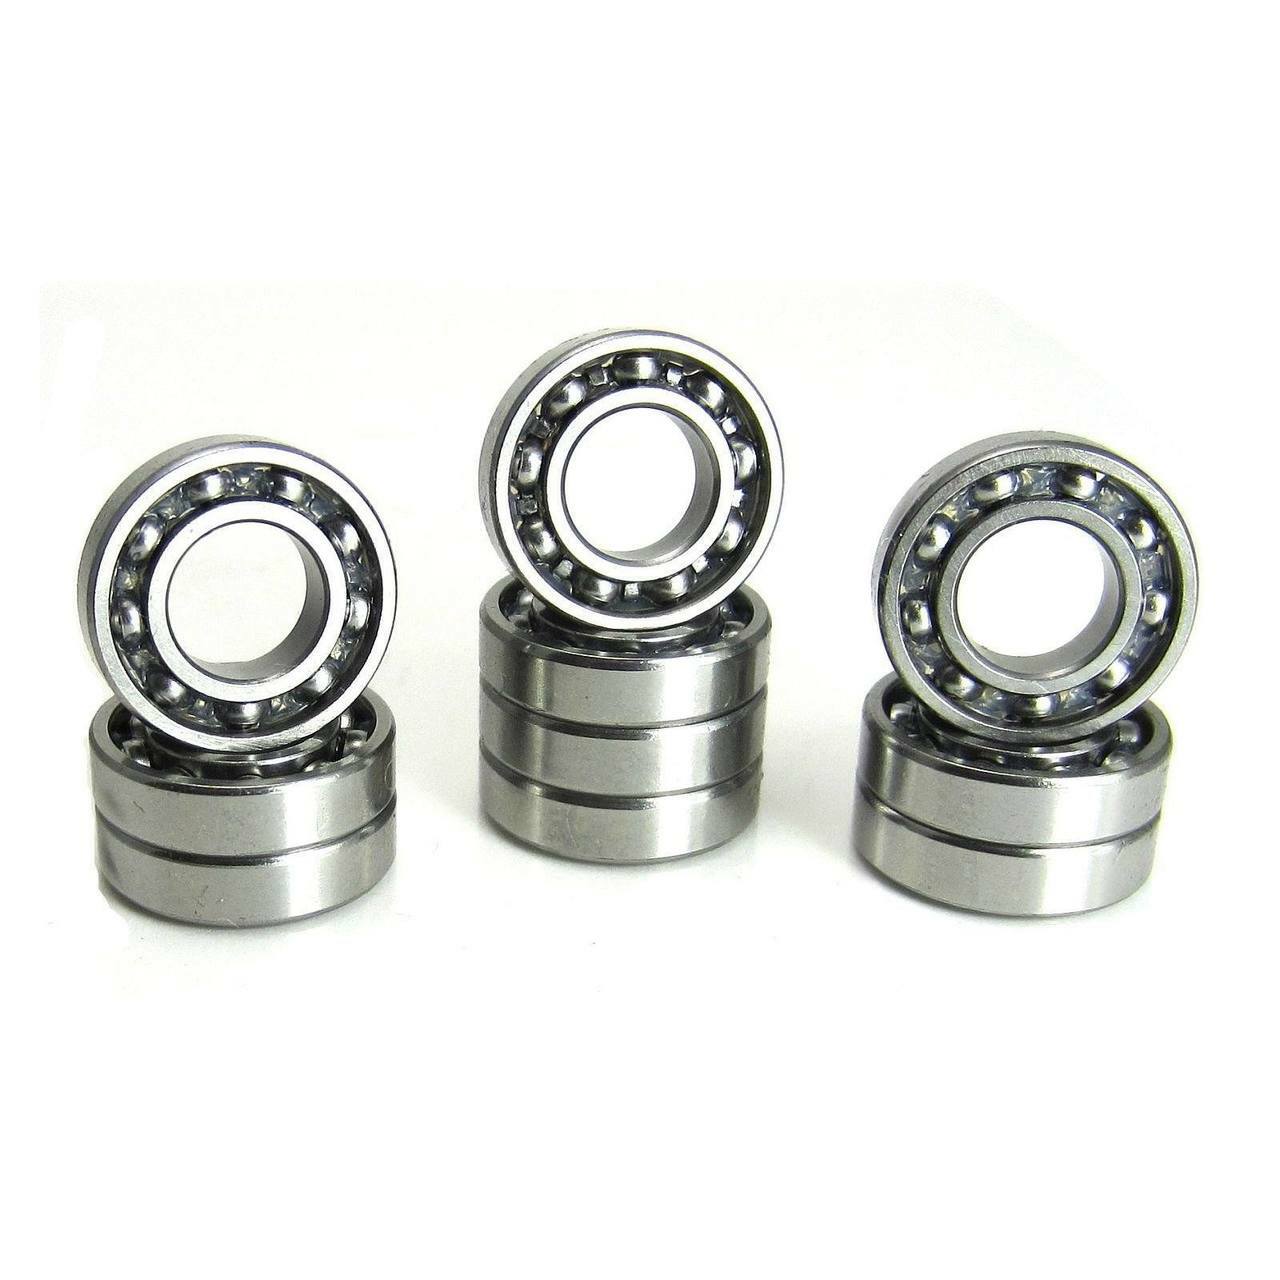 687 Open 7x14x3.5mm Precision High Speed RC Car Ball Bearing, Chrome Steel (GCr15) with No Seals ABEC-1 ABEC-3 ABEC-5